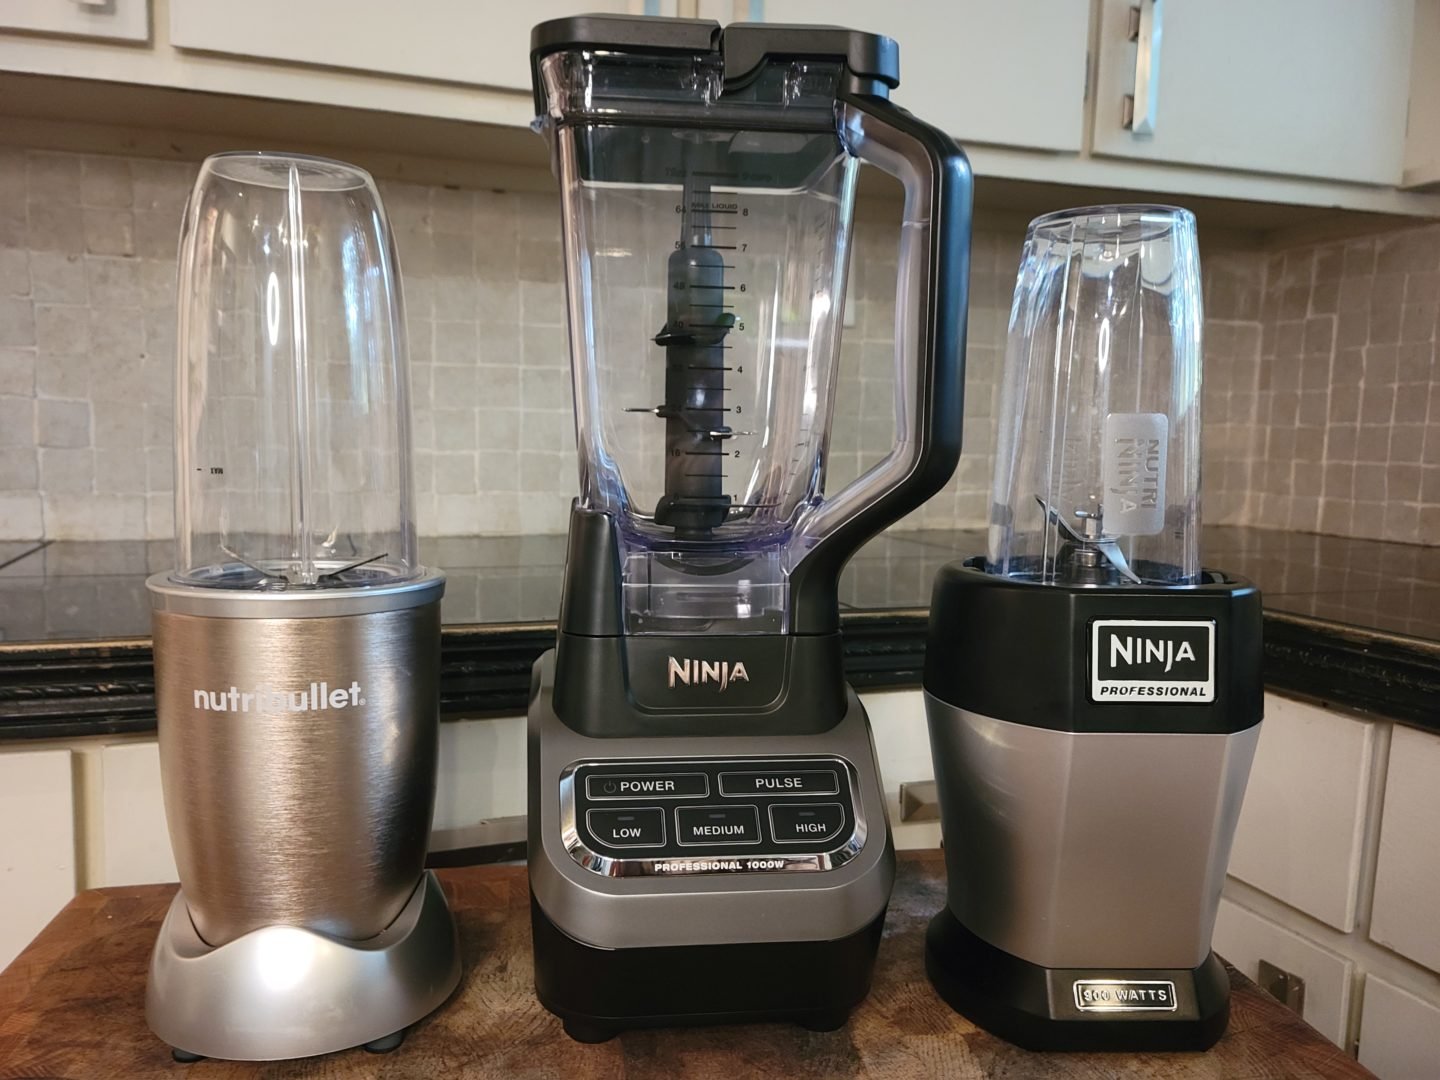 mm Ugle grad Chef Rates the 5 Best Blenders for Smoothies [10 Photos]